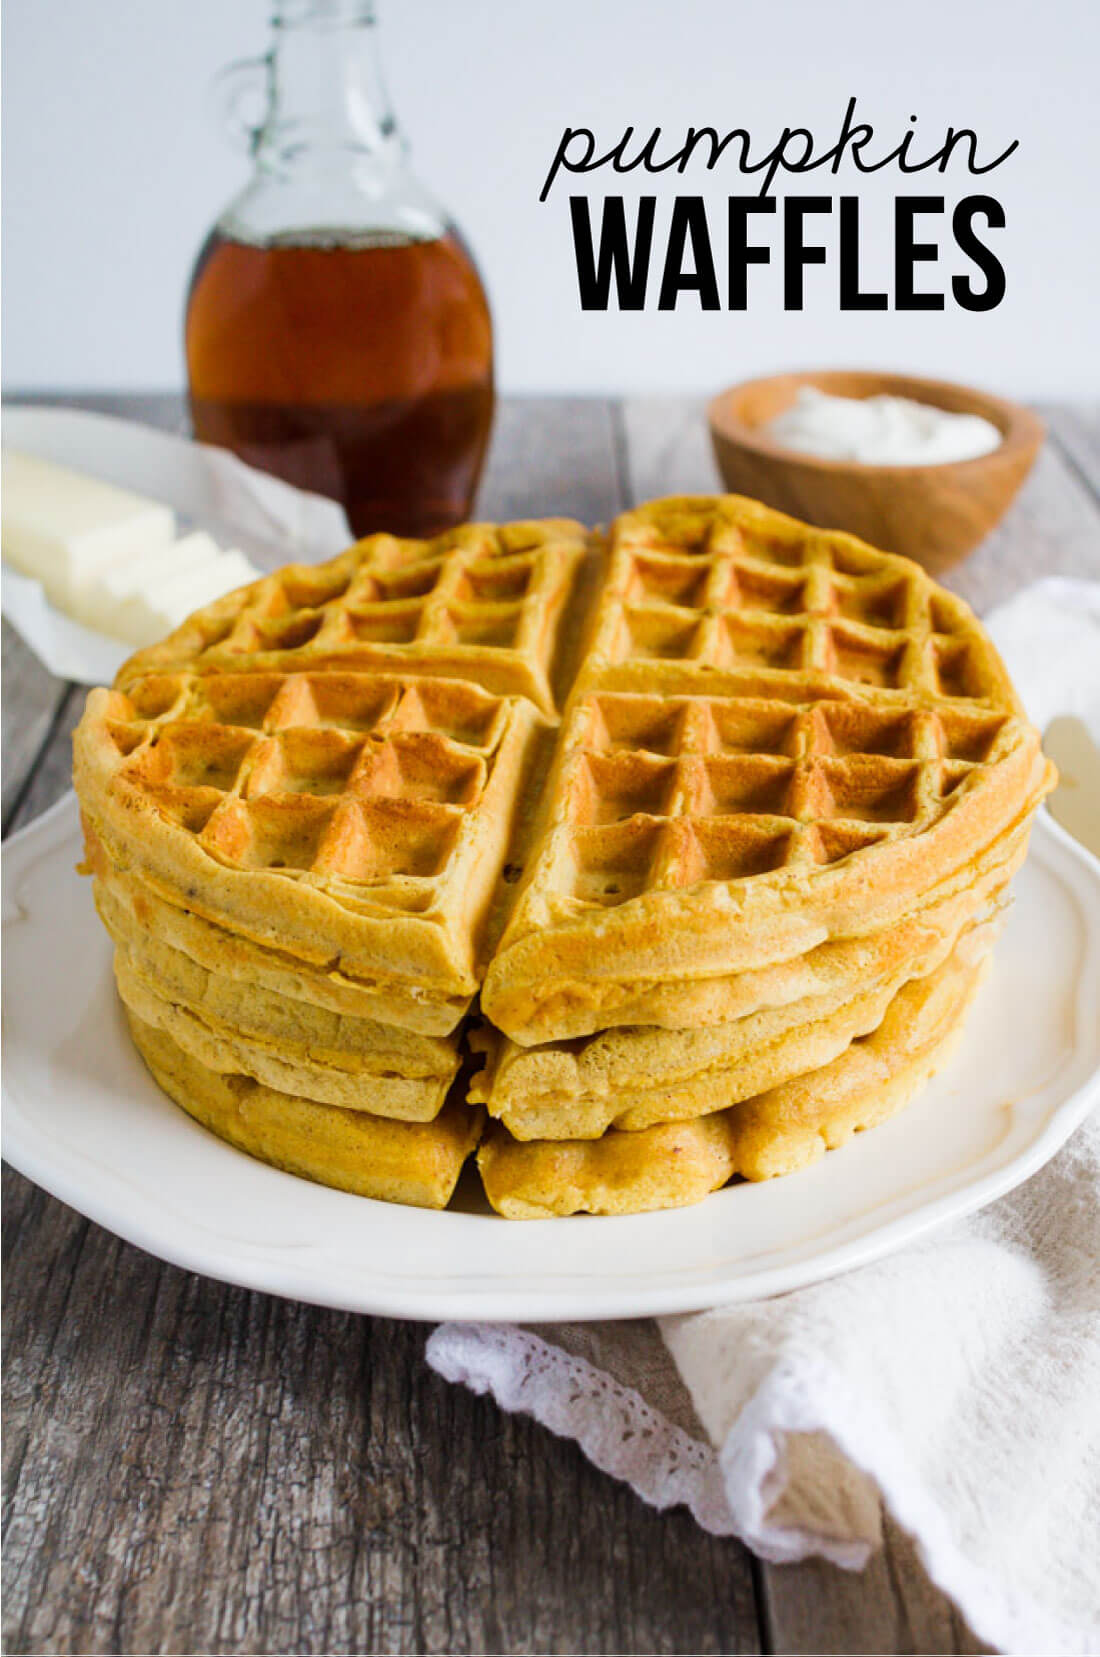 Pumpkin Waffles - this waffle recipe is so good and perfect breakfast for the fall! www.thirtyhandmadedays.com